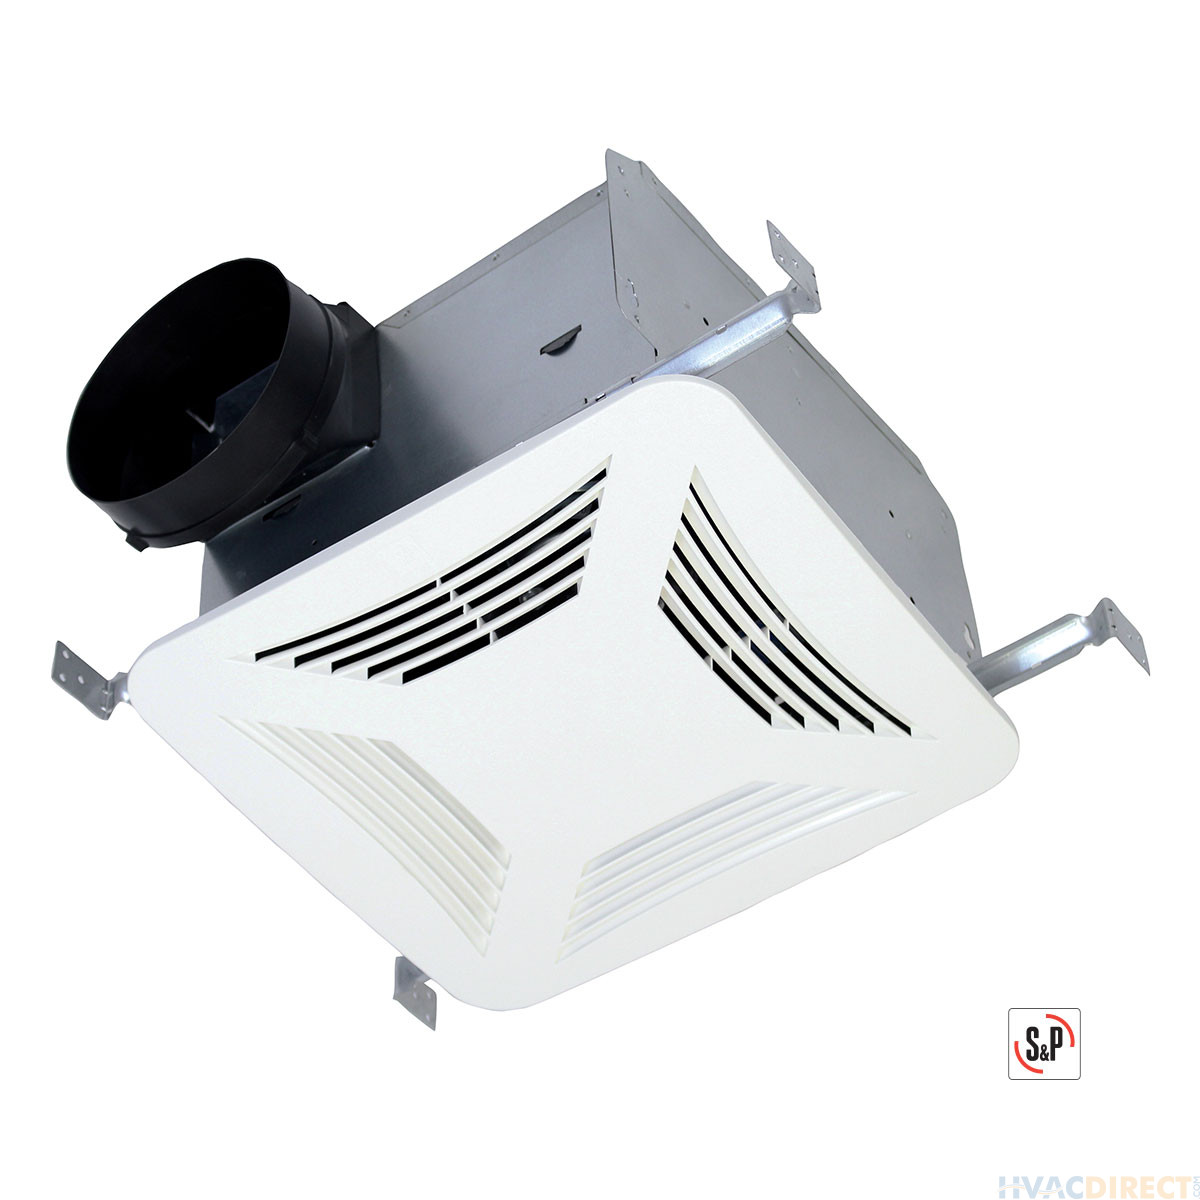 S&P Premium Choice Ceiling Mounted Bathroom Exhaust Fan With DC Motor And Humidity Sensor - PCD110XH